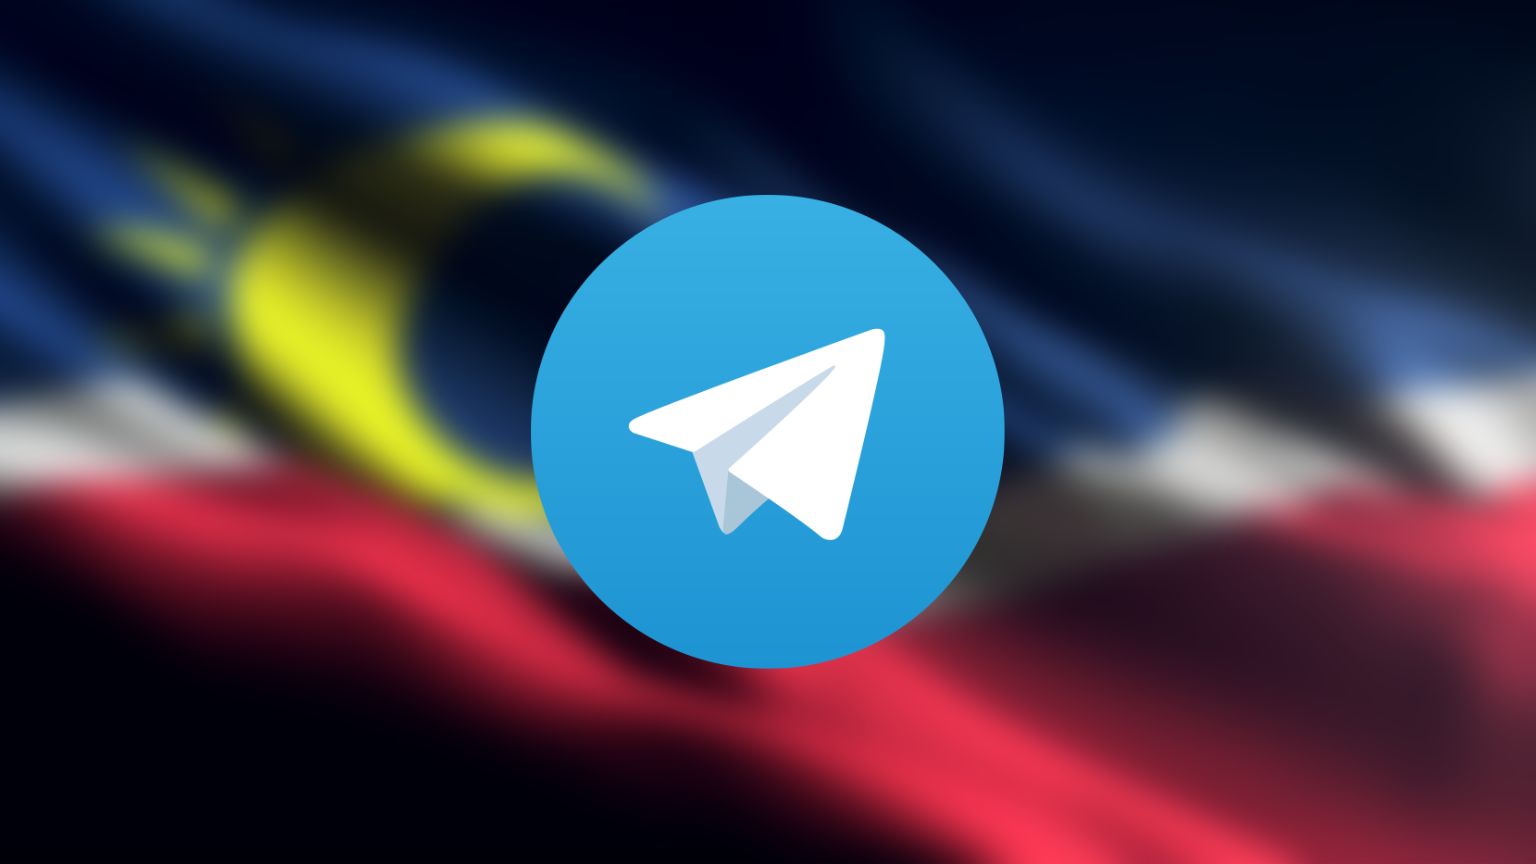 Telegram Says It Won’t Respond to Political Censorship Requests